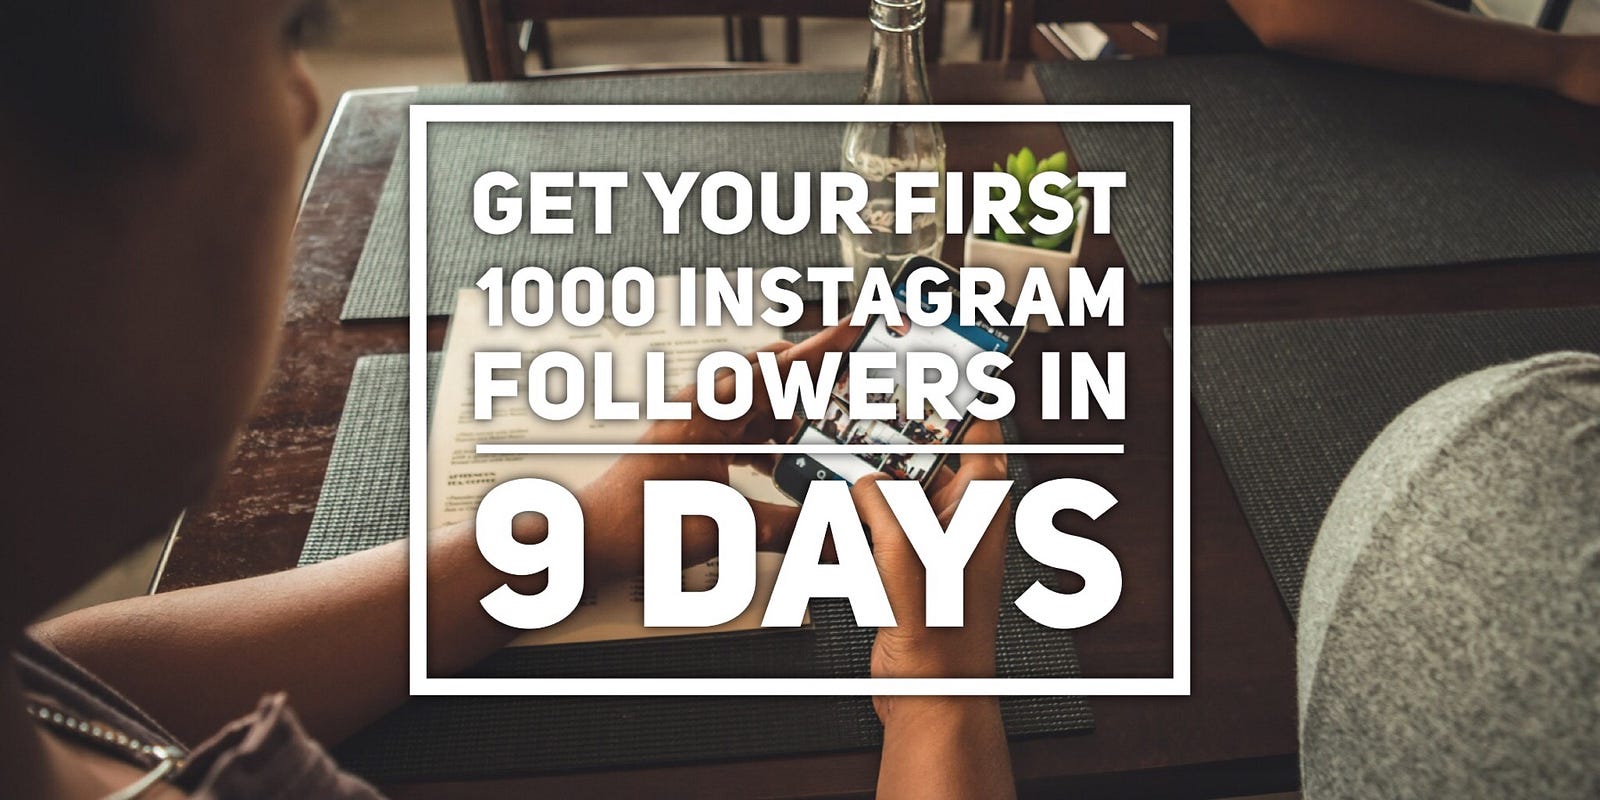 How To Get 1000 Instagram Followers In 9 Days Growthhacking